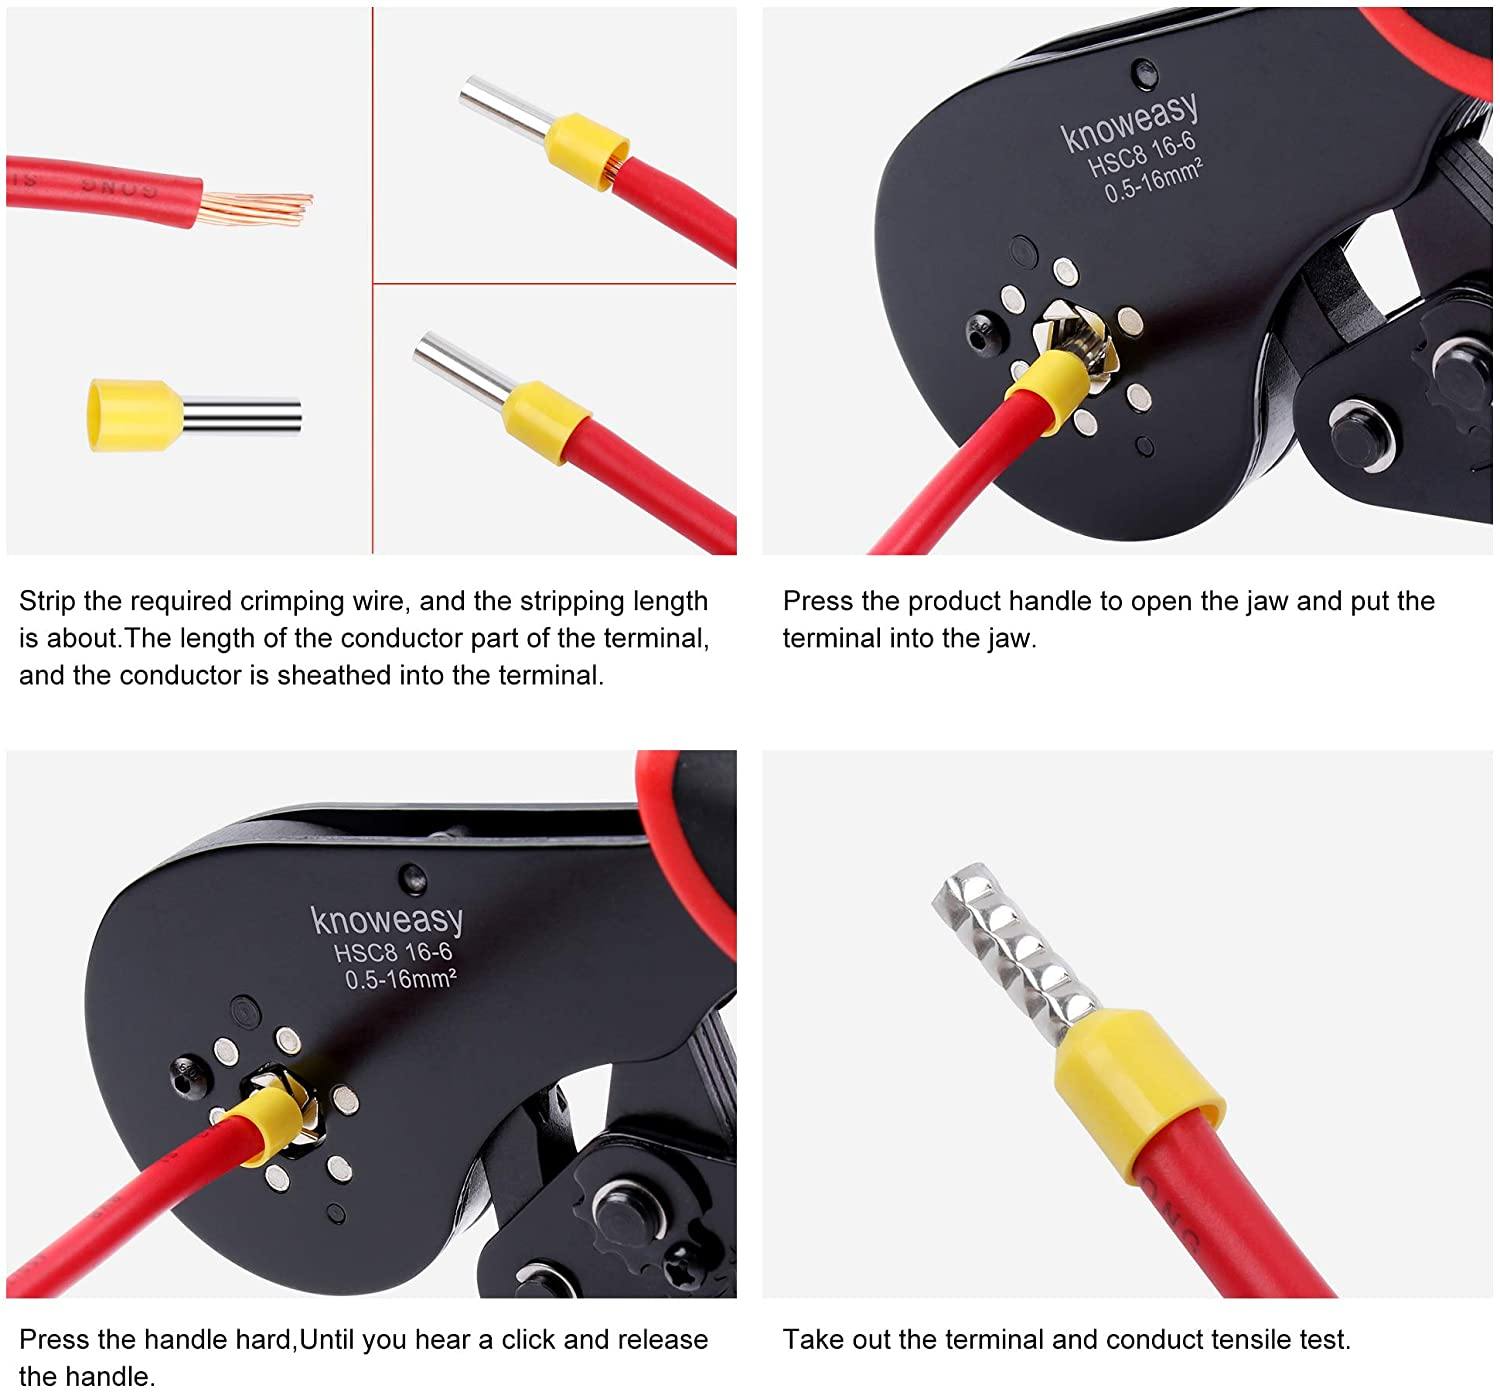 Cable Crimp Sleeves: What Are They and How Do You Use Them?